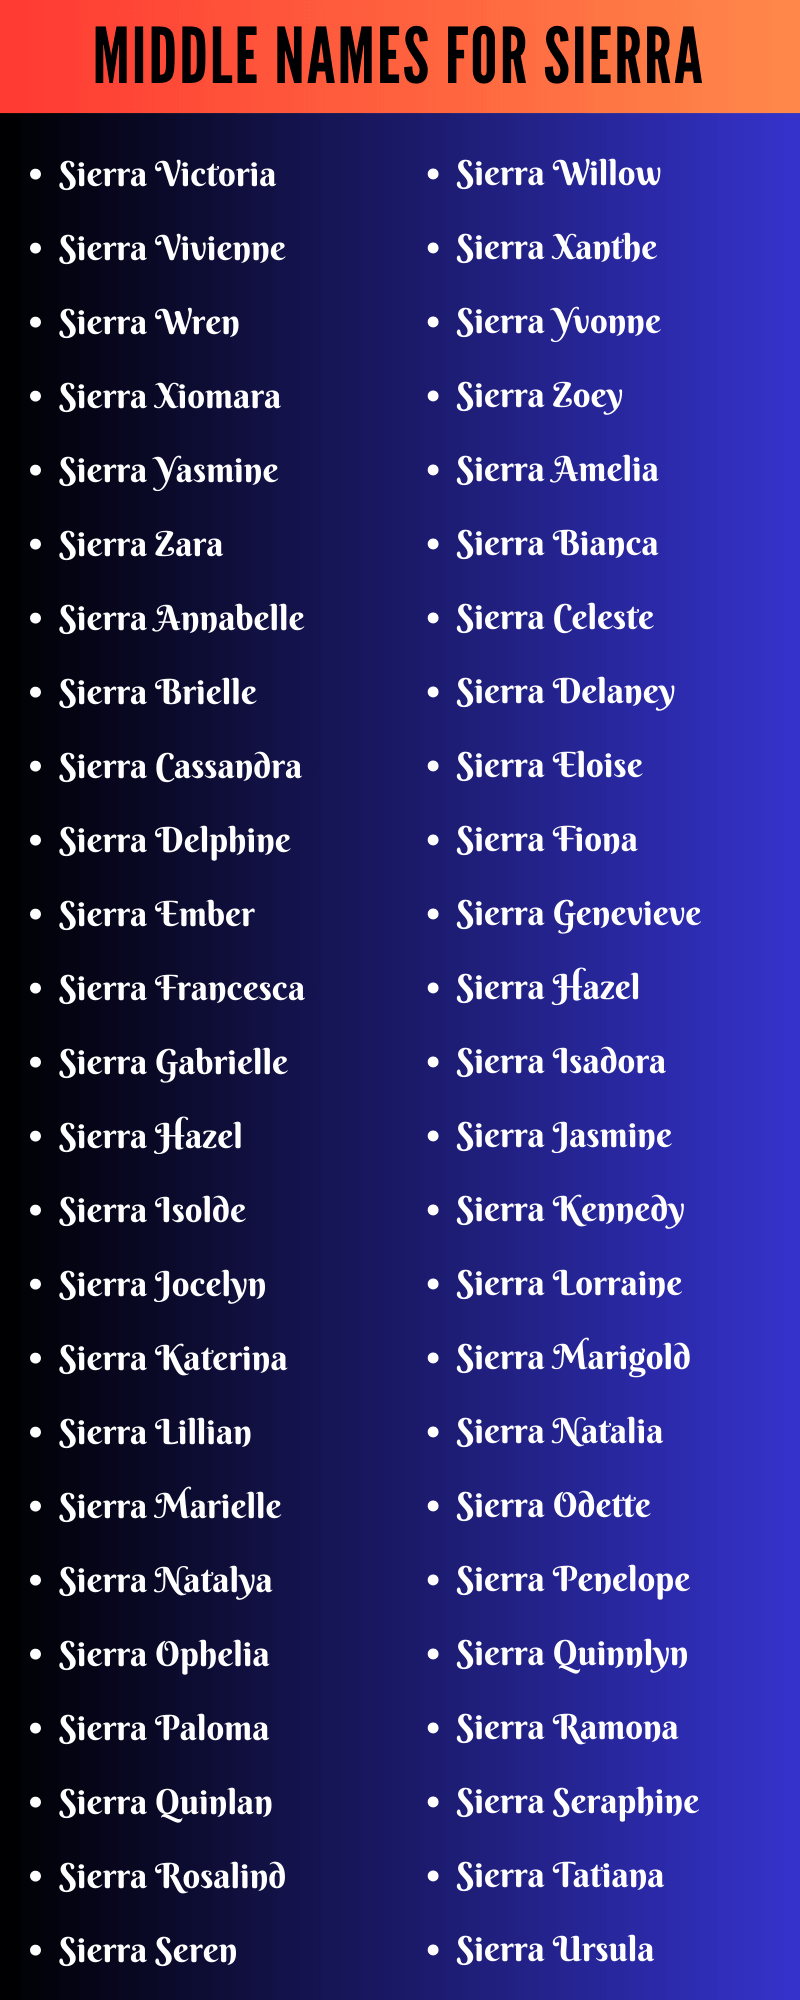 Middle Names For Sierra